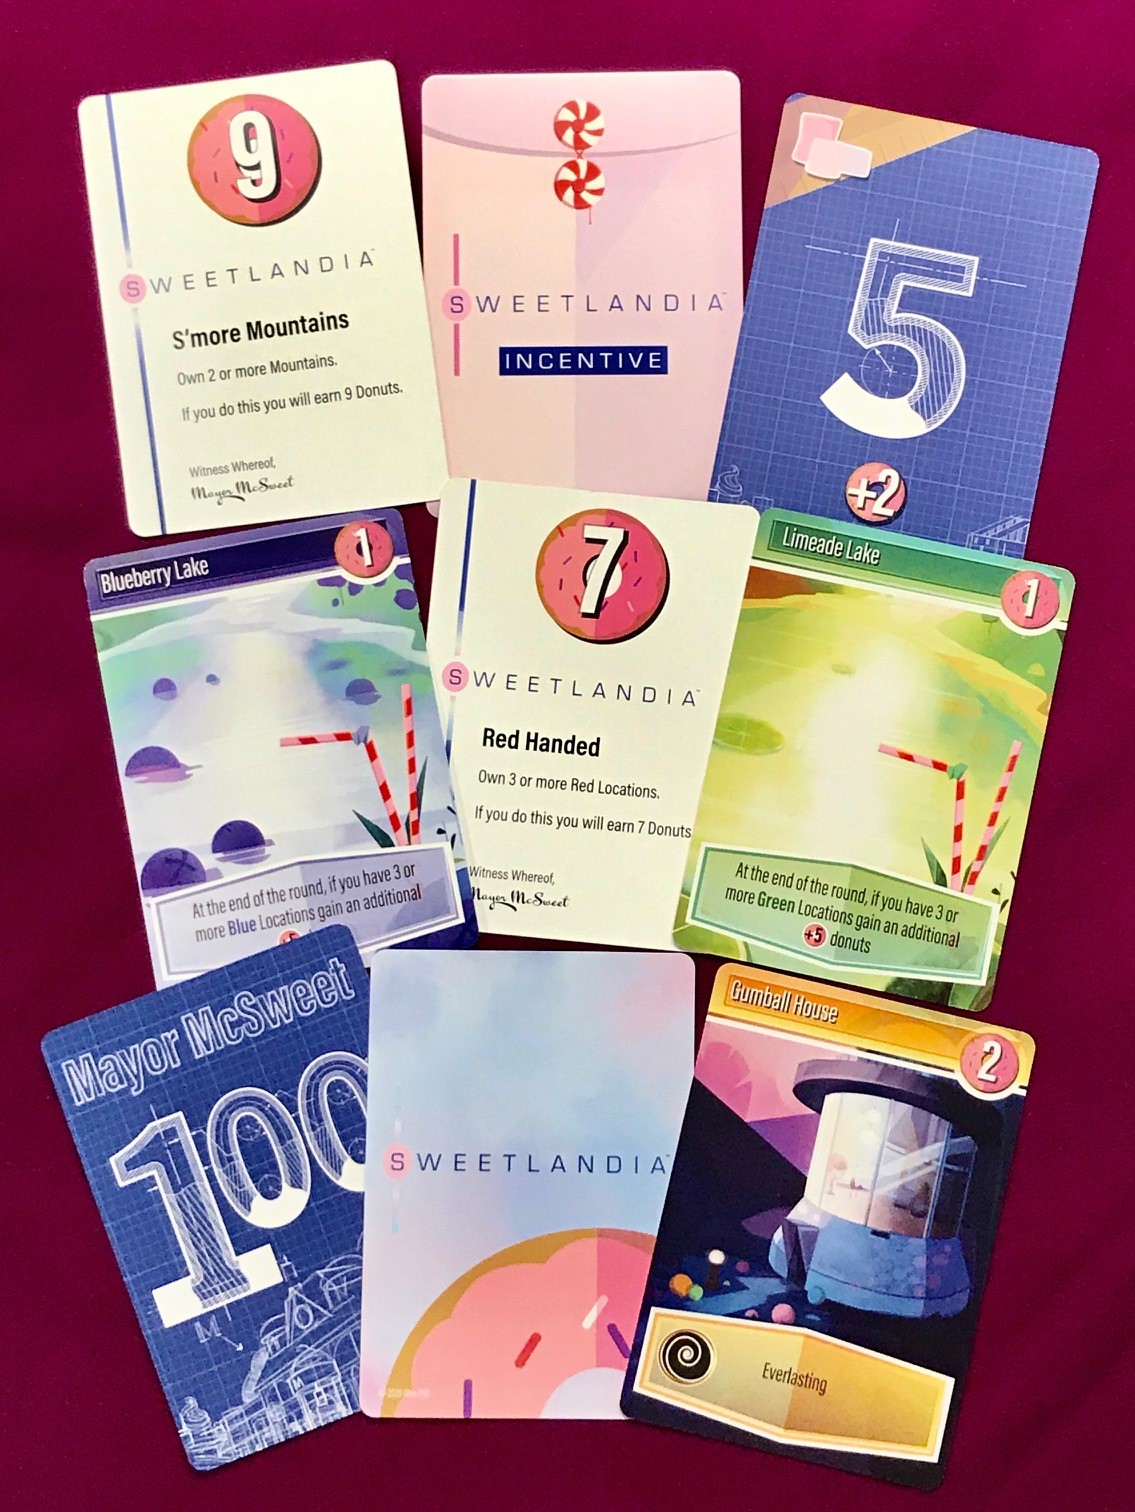 random assortment of cards from sweetlandia showing different locations, incentives, and bidding cards